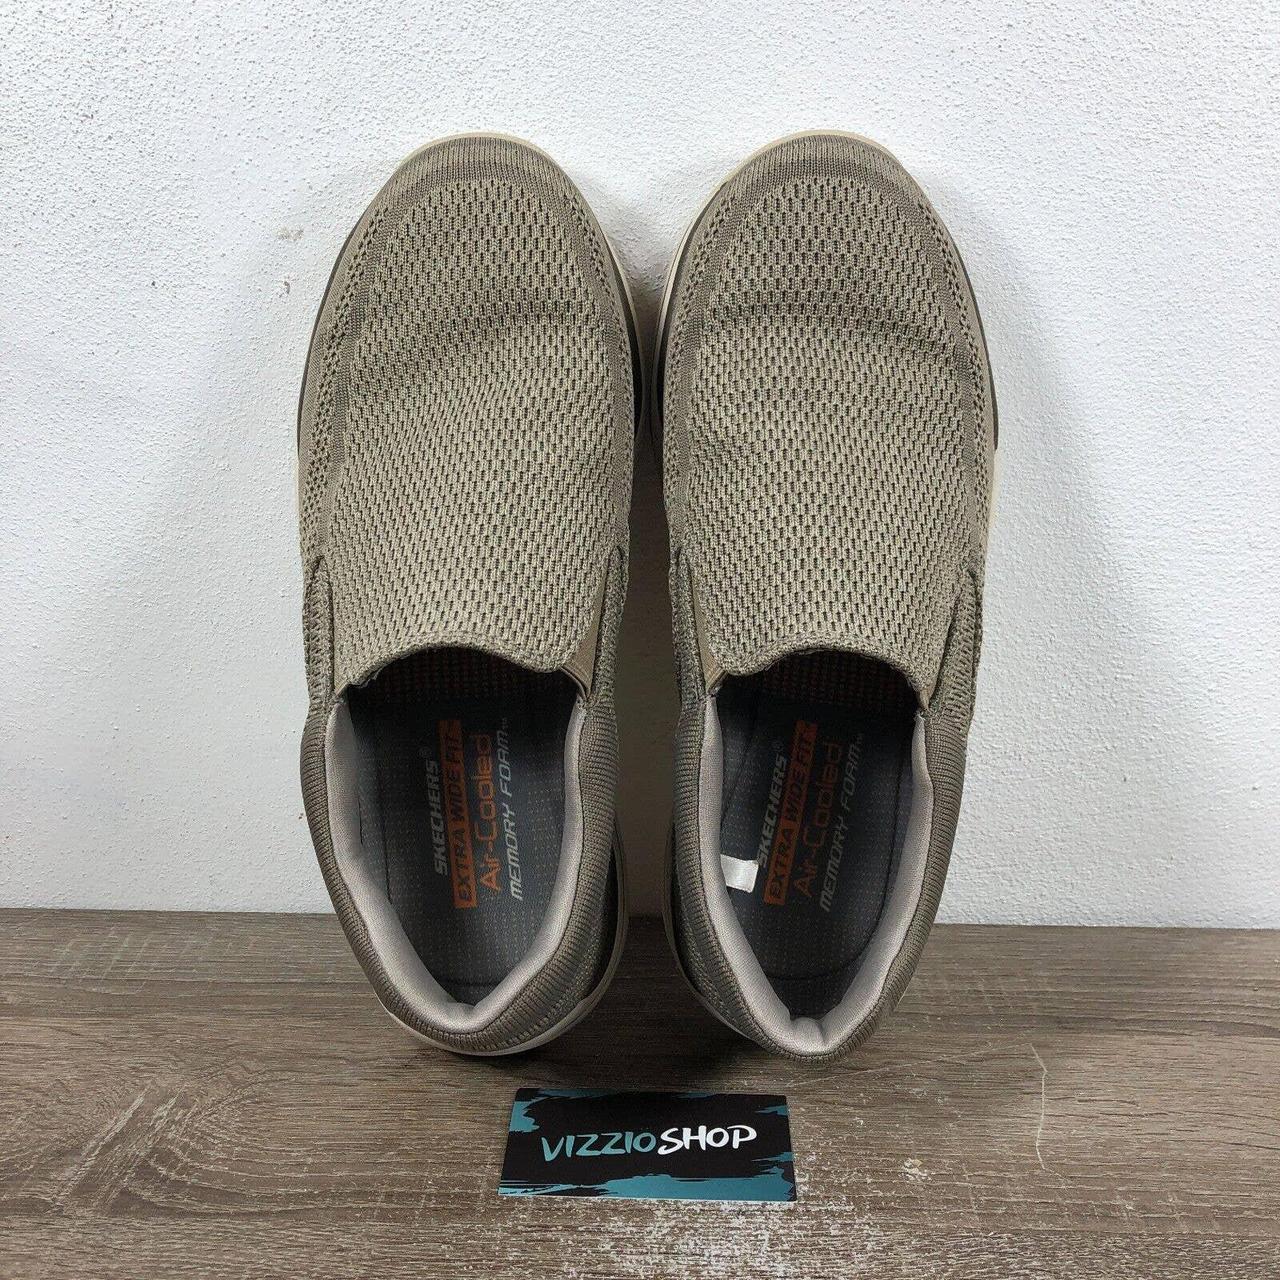 SKECHERS EXTRA WIDE air cooled memory foam